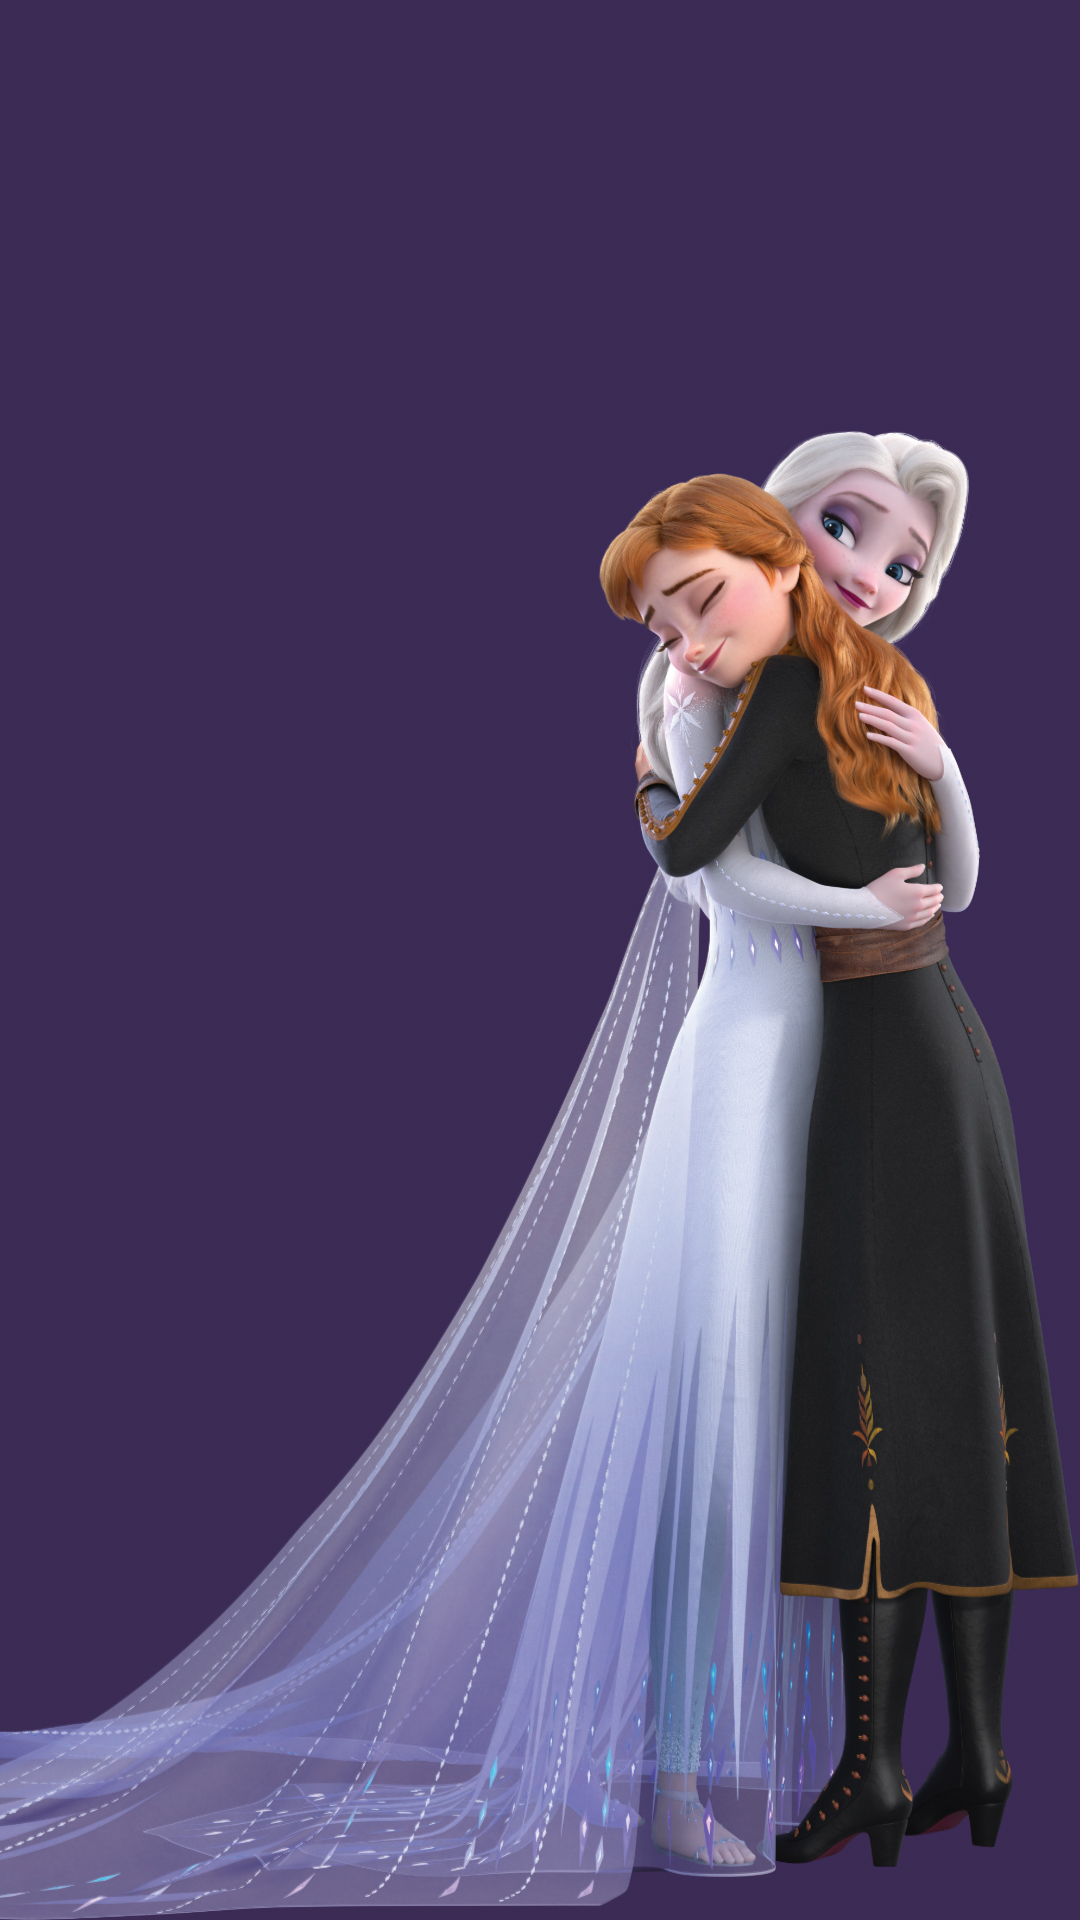 15 new Frozen 2 HD wallpapers with Elsa in white dress and her hair down -  desktop and mobile 